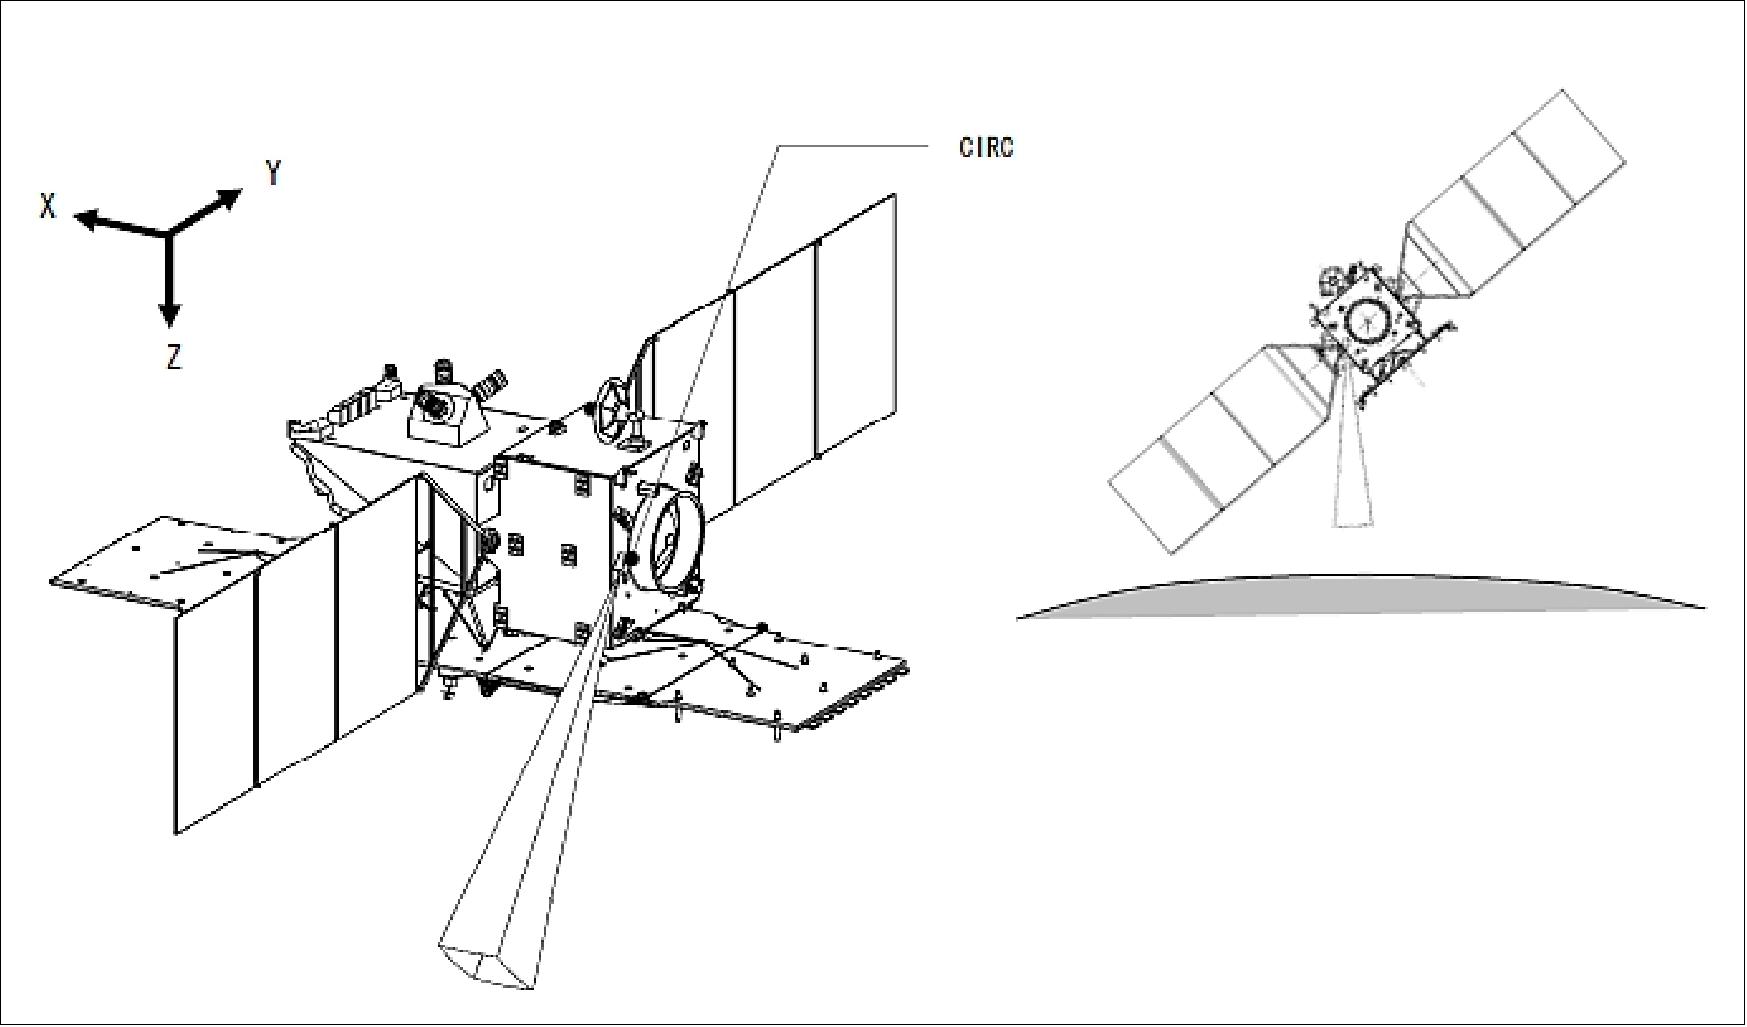 Figure 77: Schematic view of ALOS-2 and the mounting location of CIRC (image credit: JAXA)